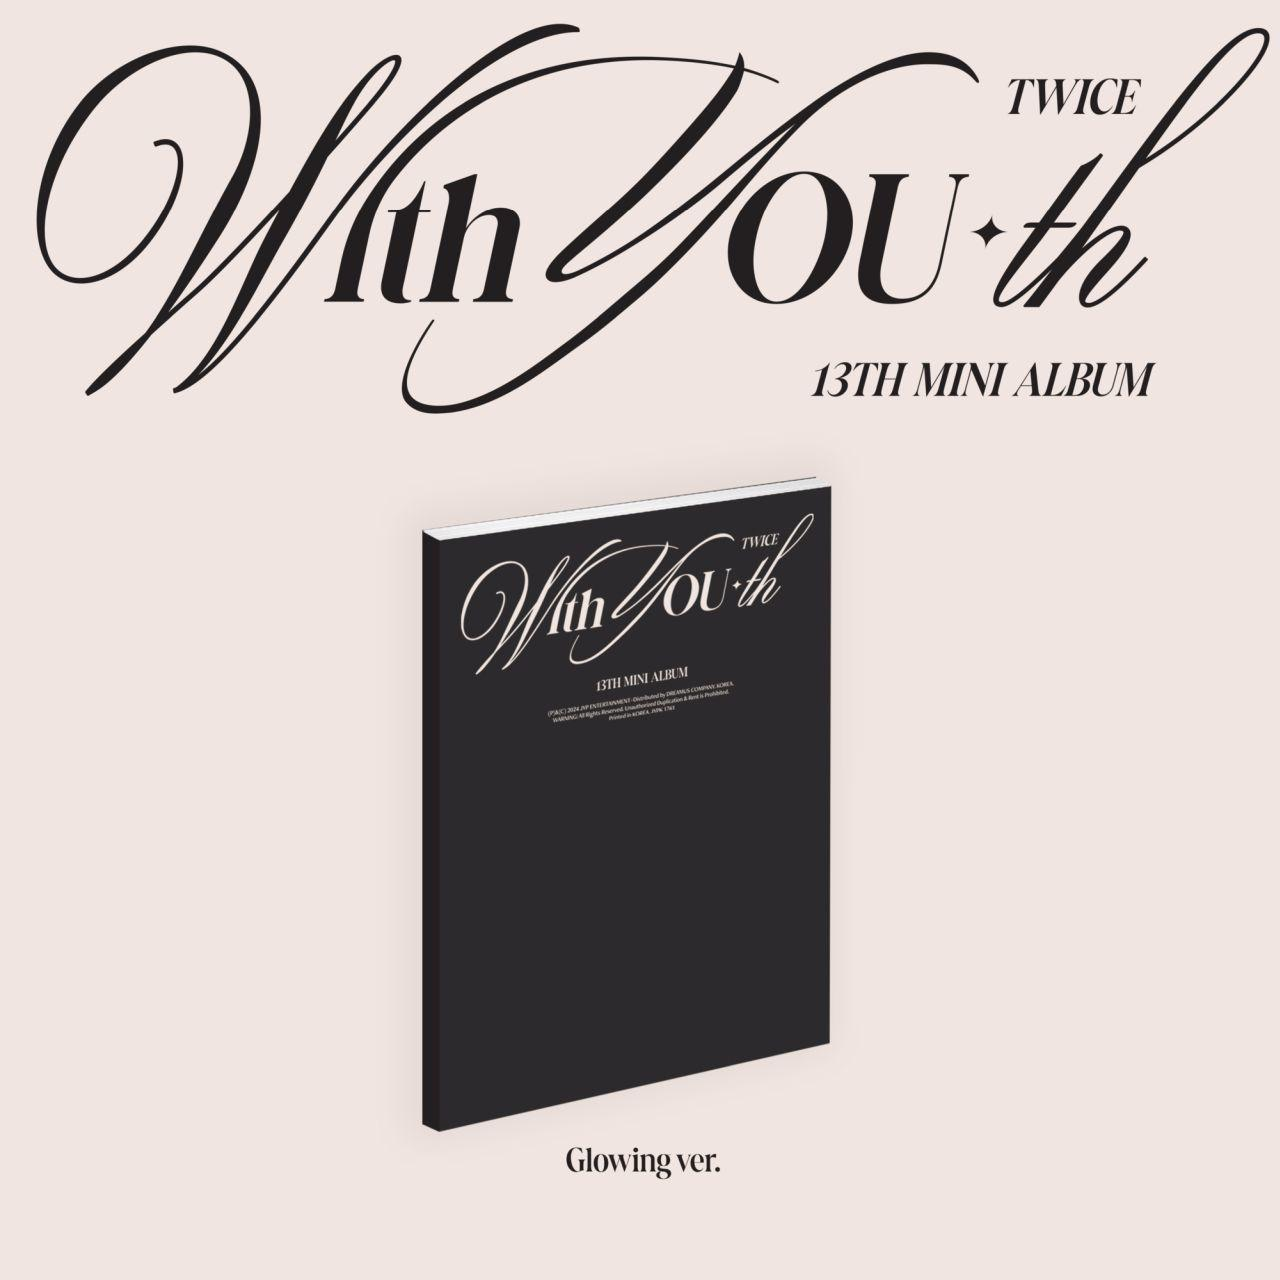 Twice - With You-TH Ver.) (Glowing - (CD)